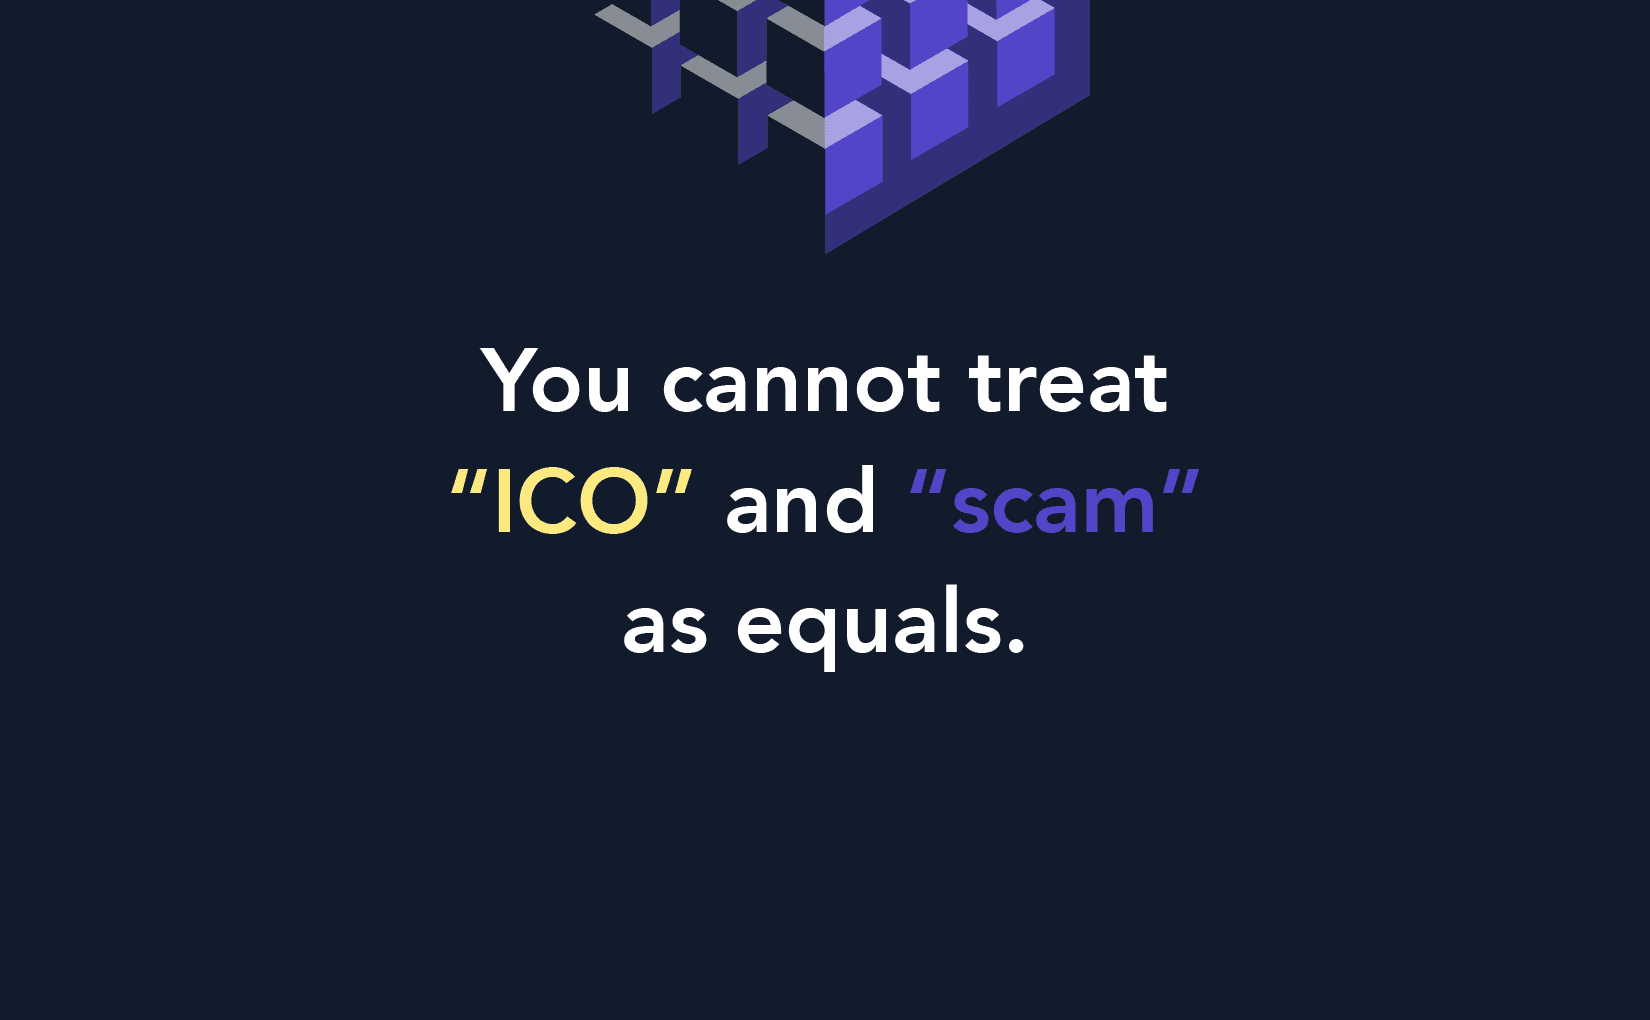 You cannot treat “ICO” and “scam” as equals.